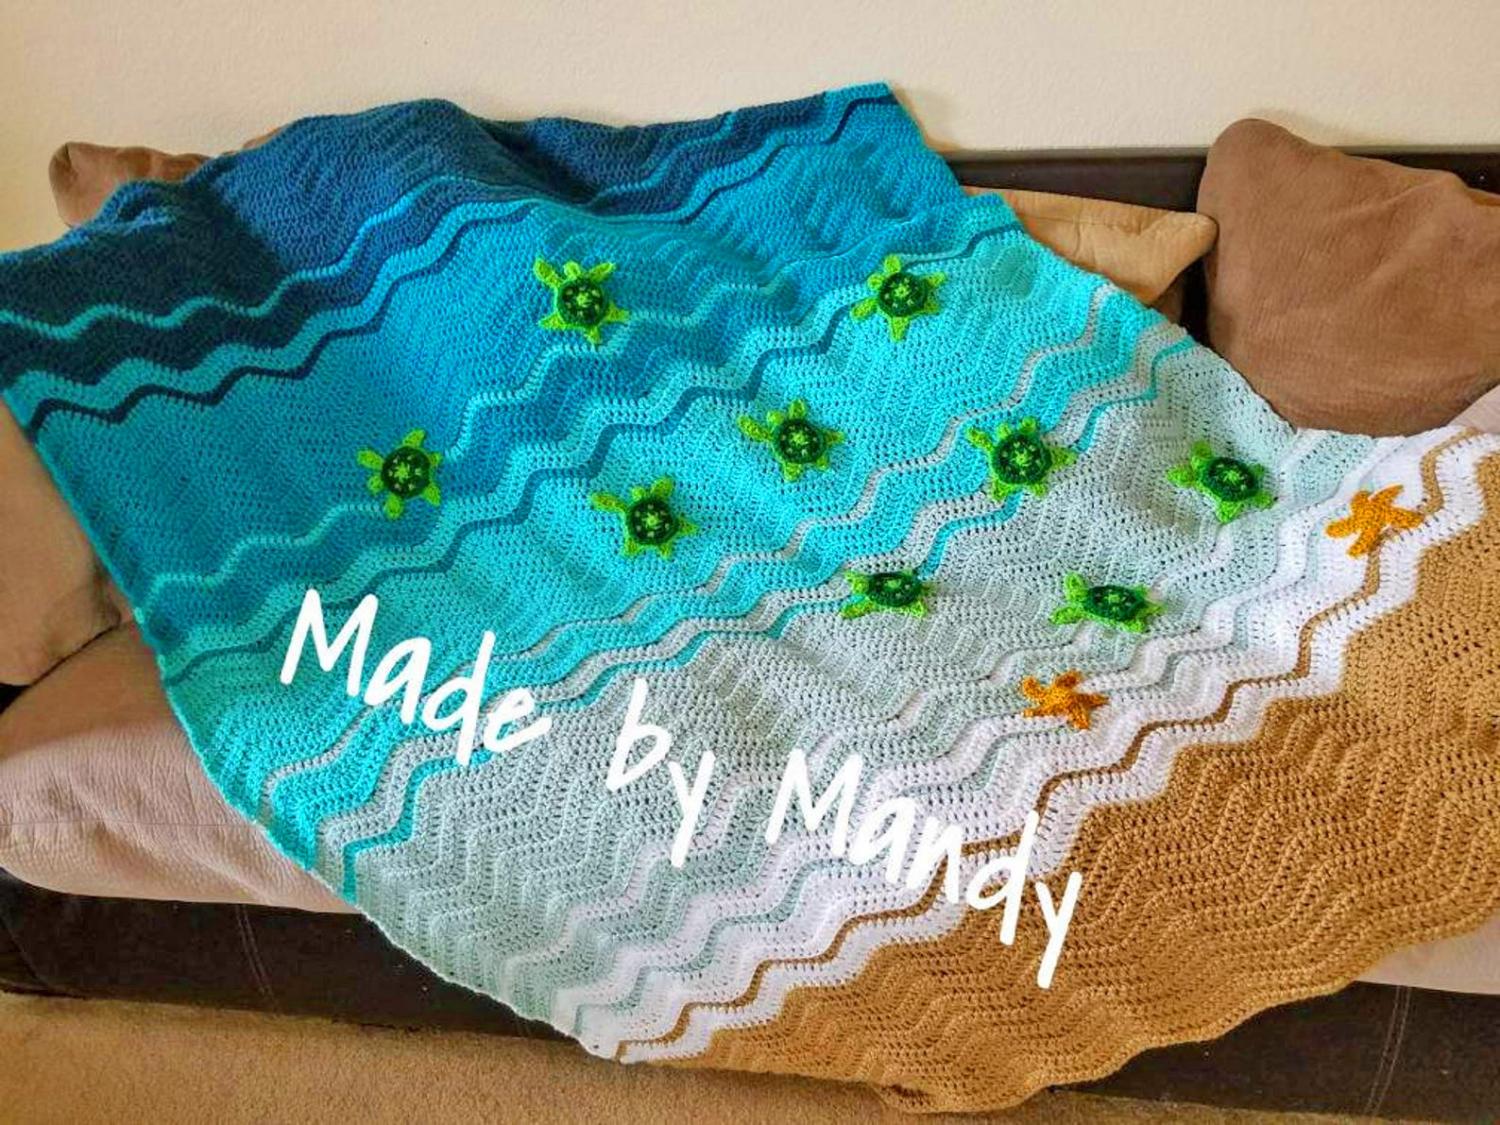 People Are Creating Crochet Sea Turtle Beach Blankets And They Look Amazing,Cat Colors